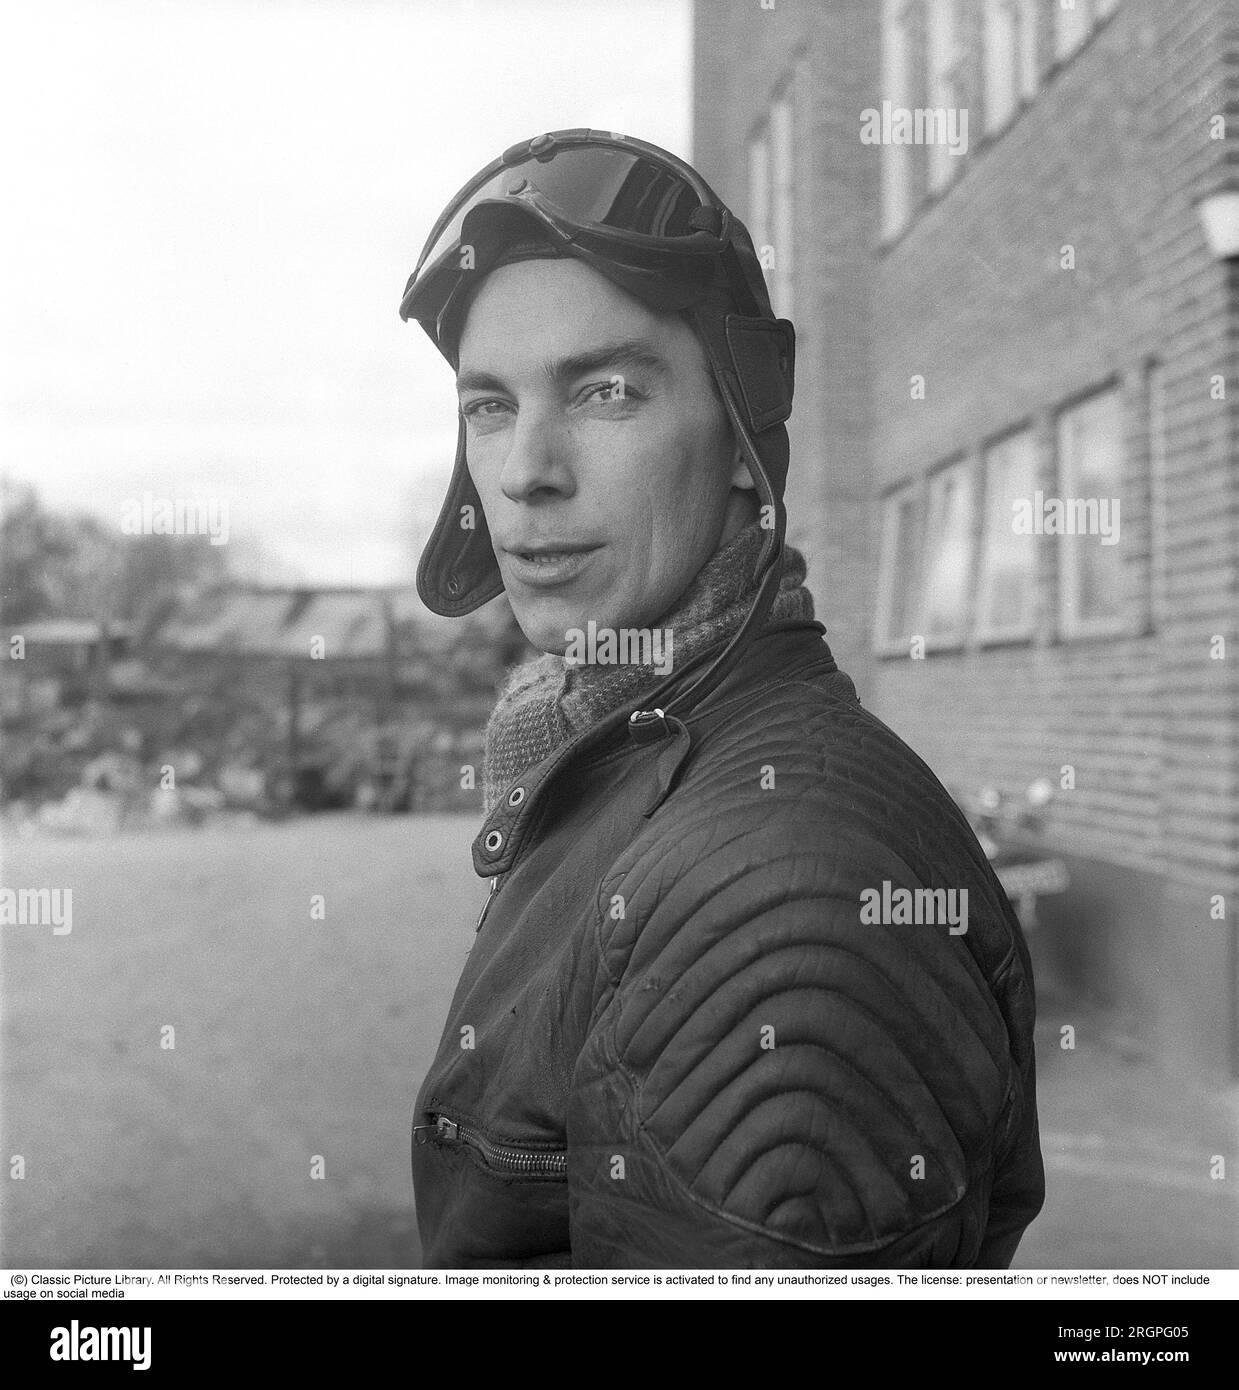 Motorcyclist in the 1950s. A young man dressed in the typical way the motorcyclists did in the 1950s. All leather. Leather boots, trousers and jacket. Instead of a helmet a leather cap was the typical headgear of the time.     Sweden 1953. He is actor Sven-Eric Gamble, 1924-1976. Kristoffersson ref BM72-2 Stock Photo